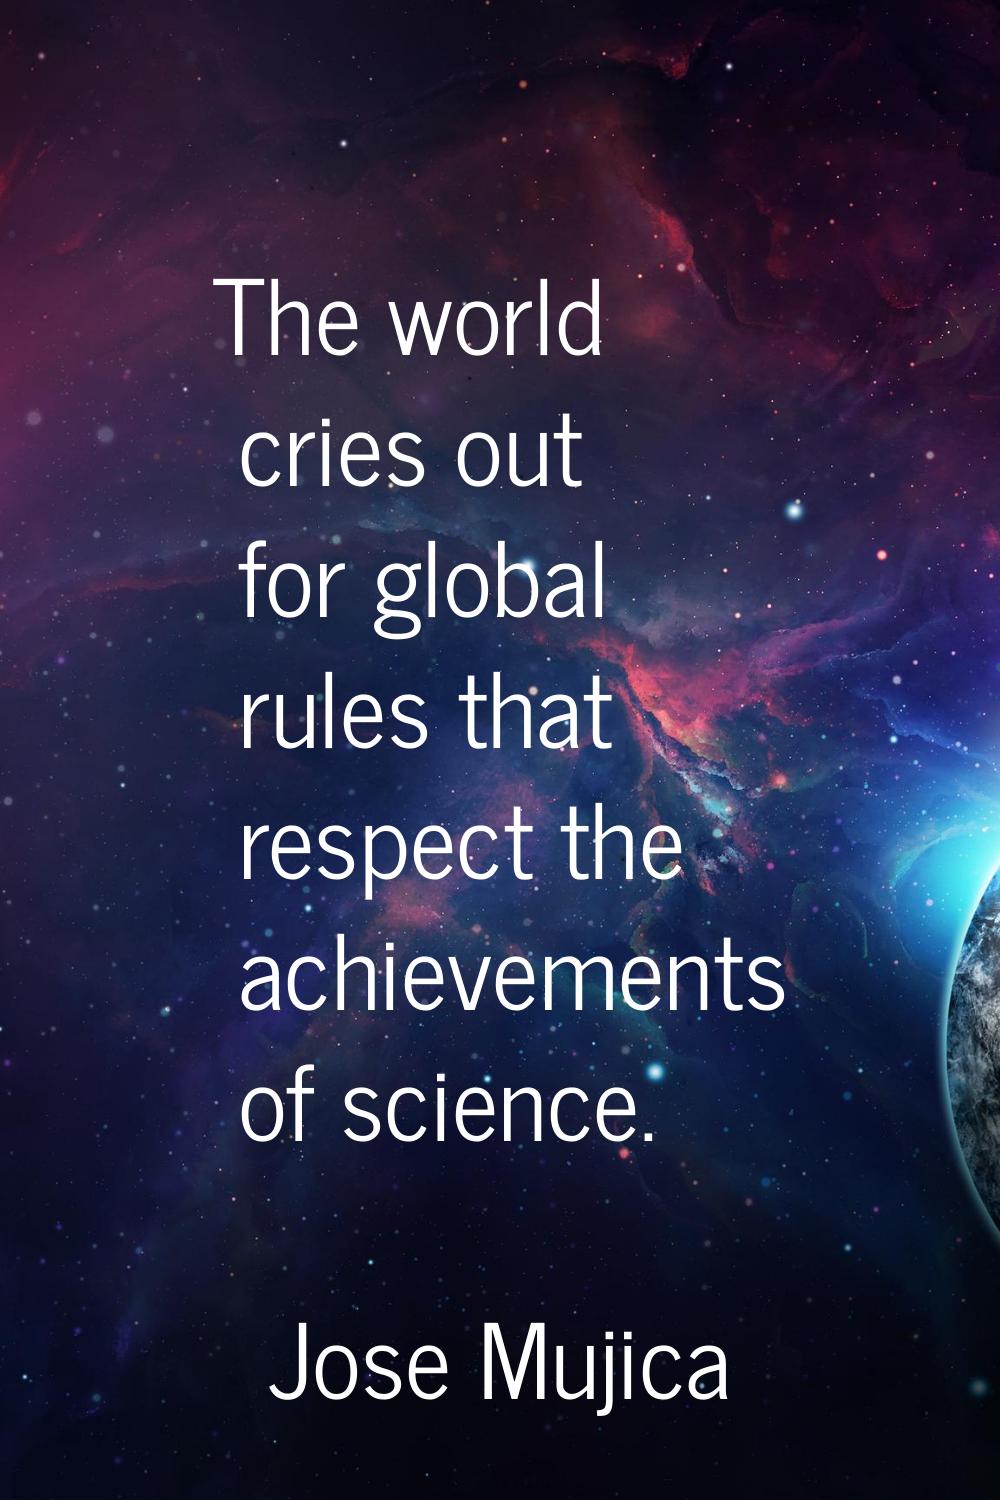 The world cries out for global rules that respect the achievements of science.